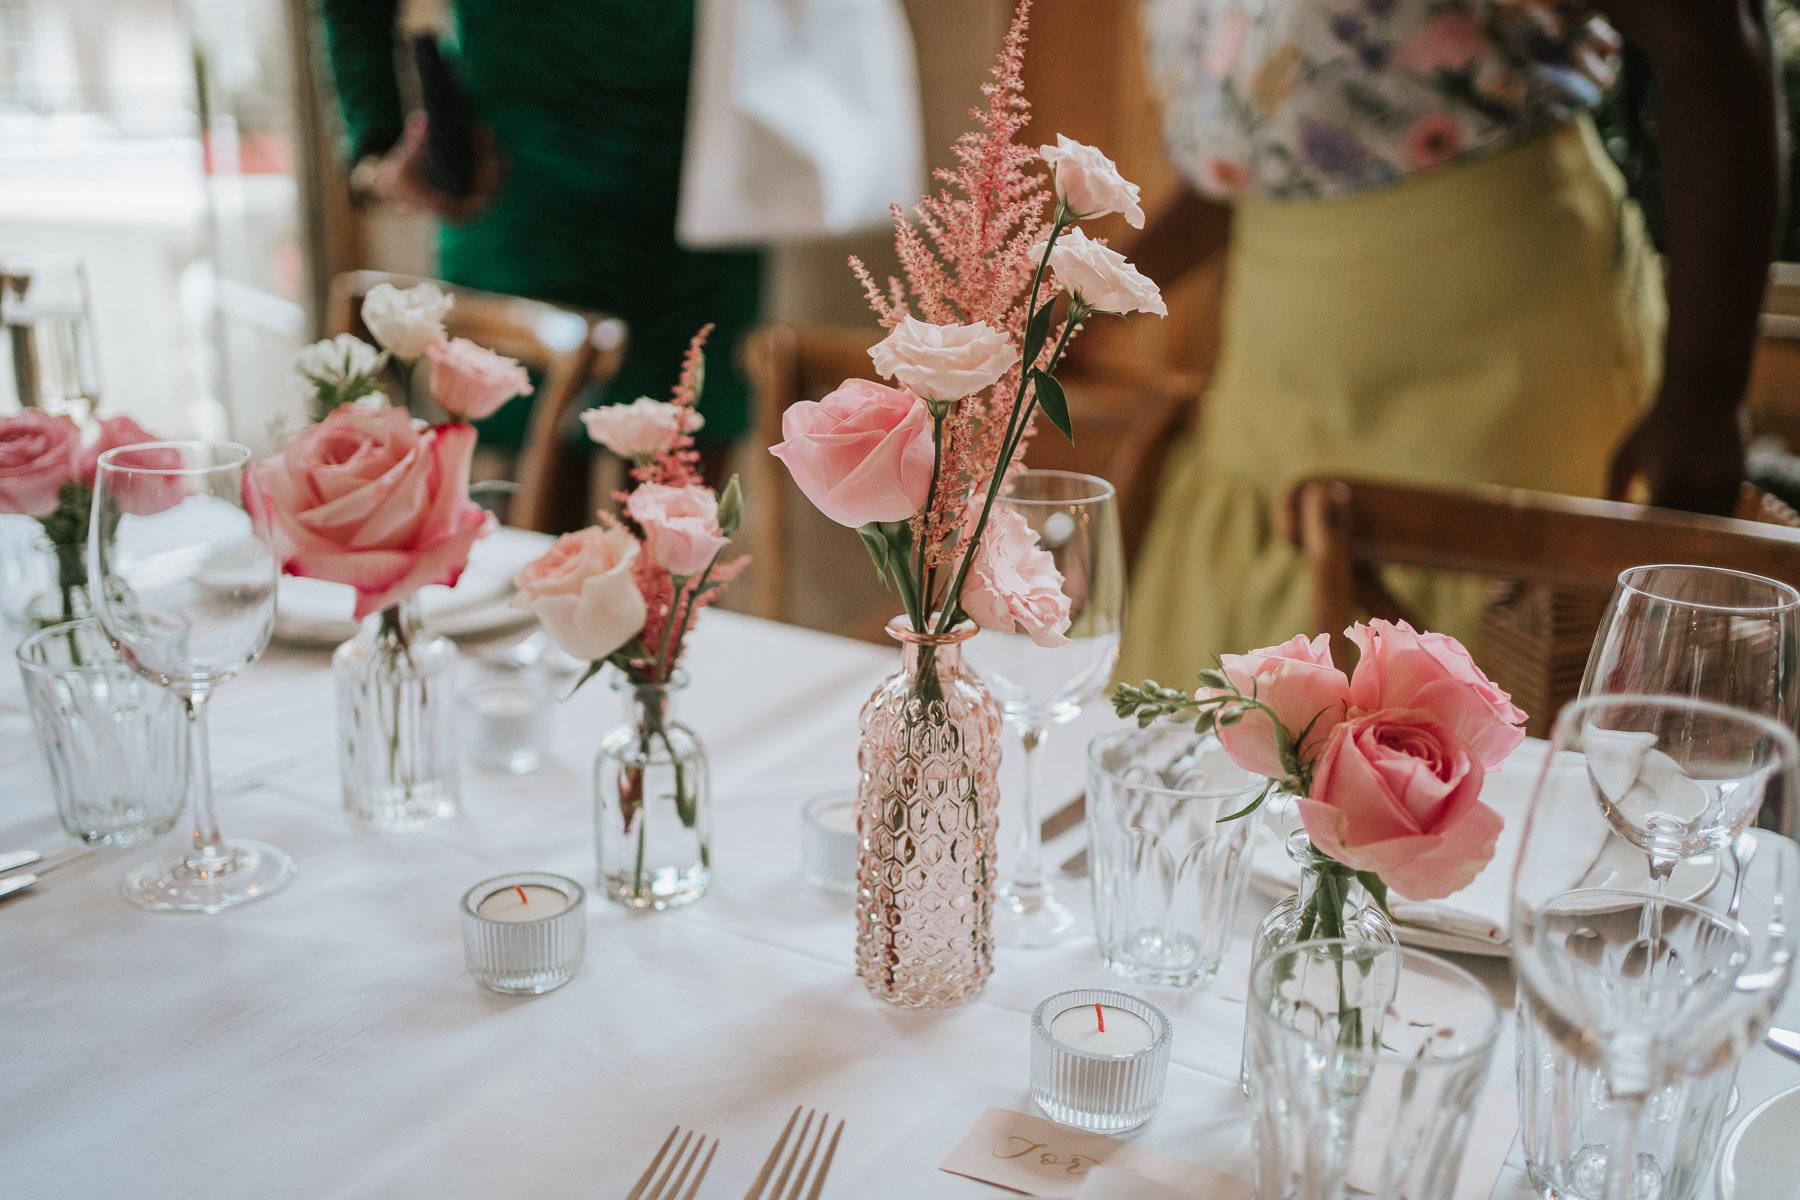  Small pink roses and other flowers in vases on table in the Main Dining Room of  The Orange  in Belgravia. 